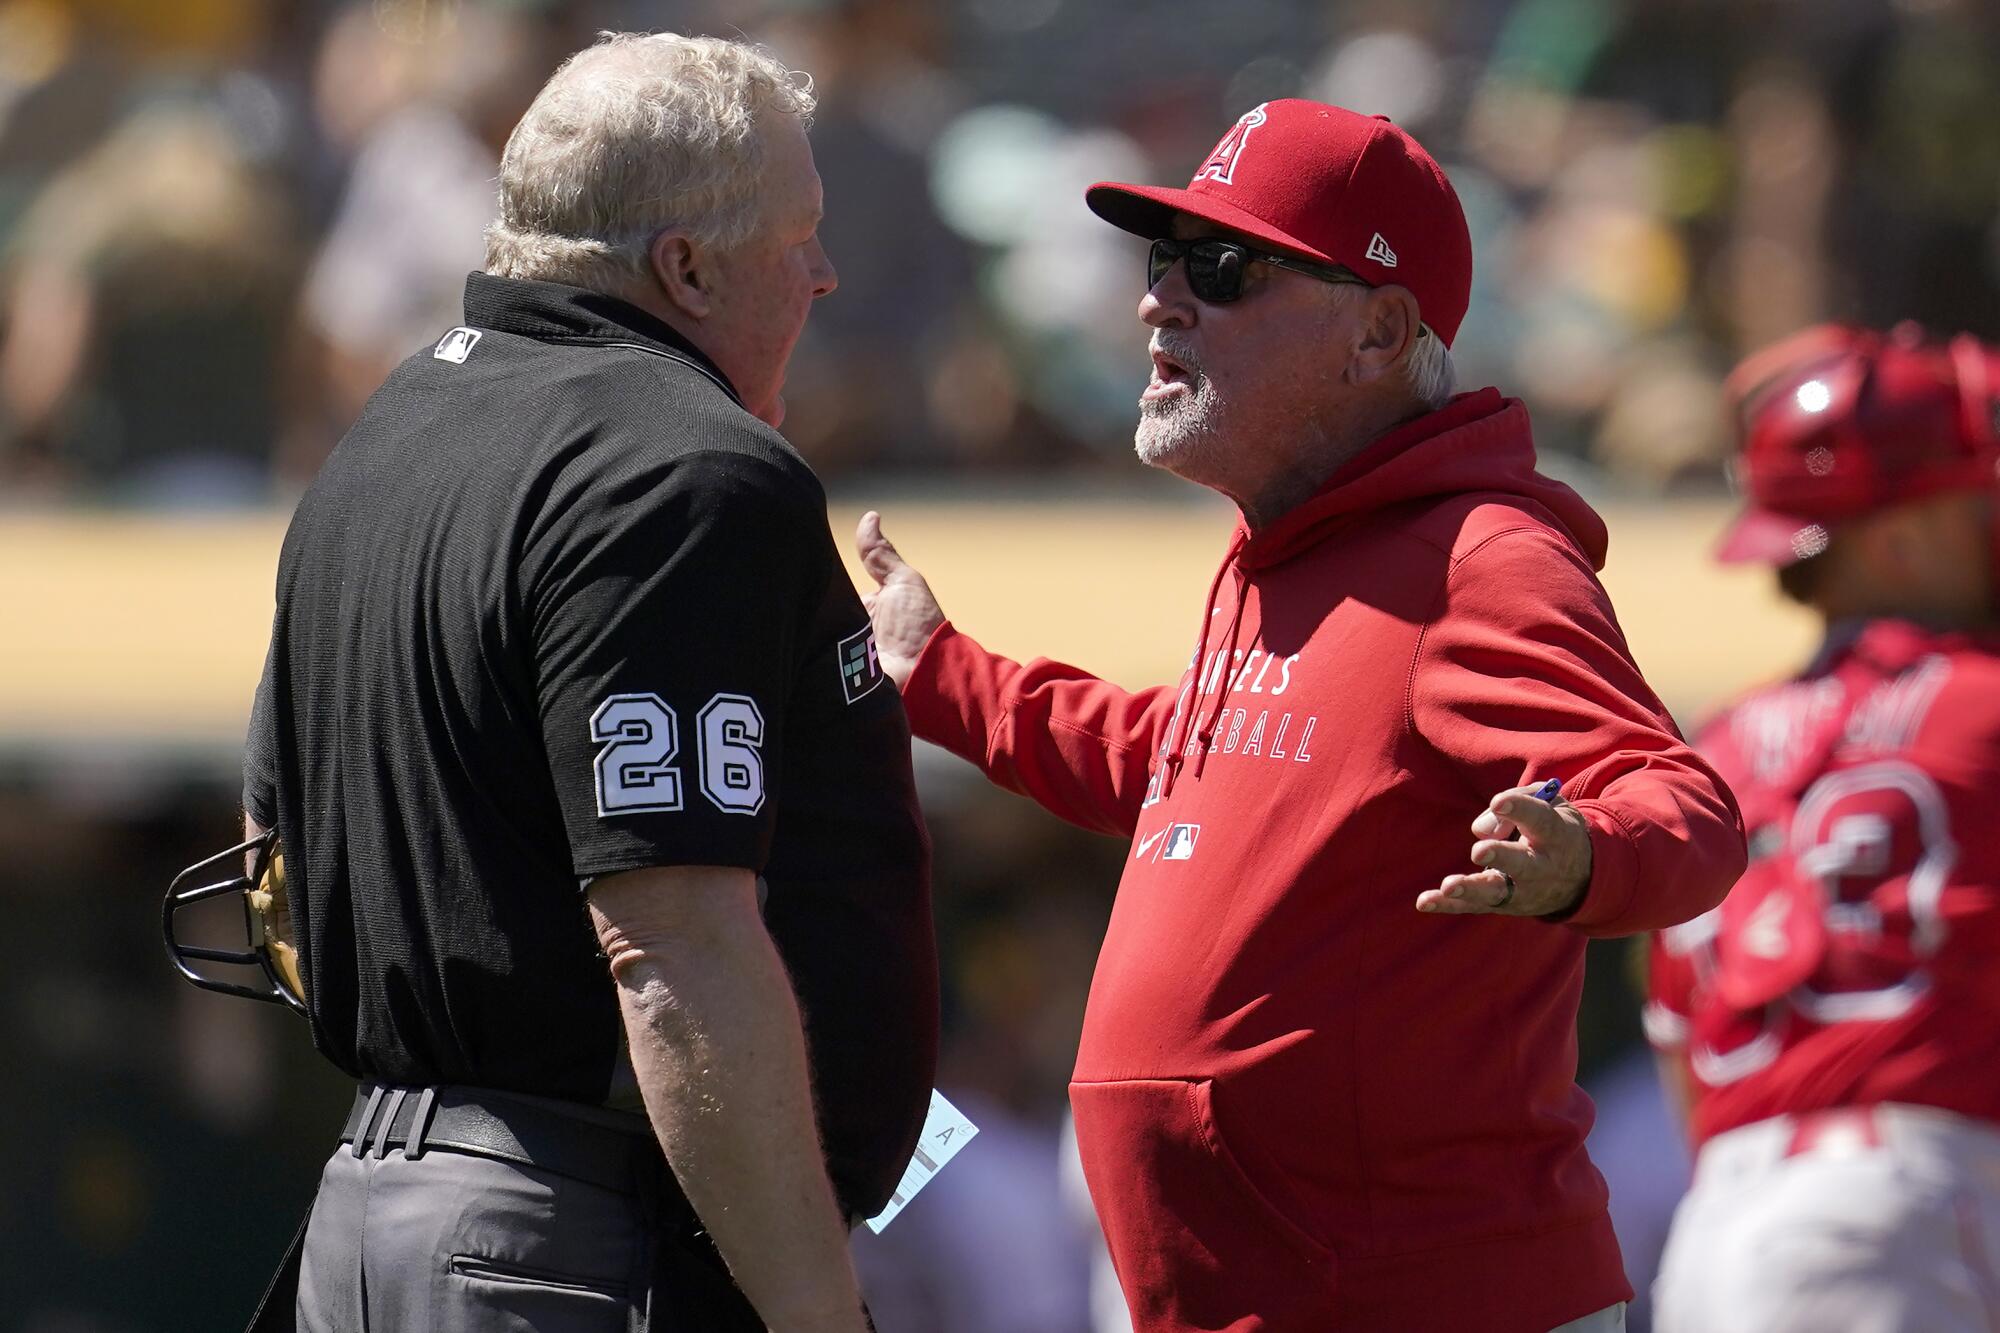 Angels manager Joe Maddon argues with home plate umpire during the Angels loss on Tuesday. (AP Photo/Jeff Chiu)